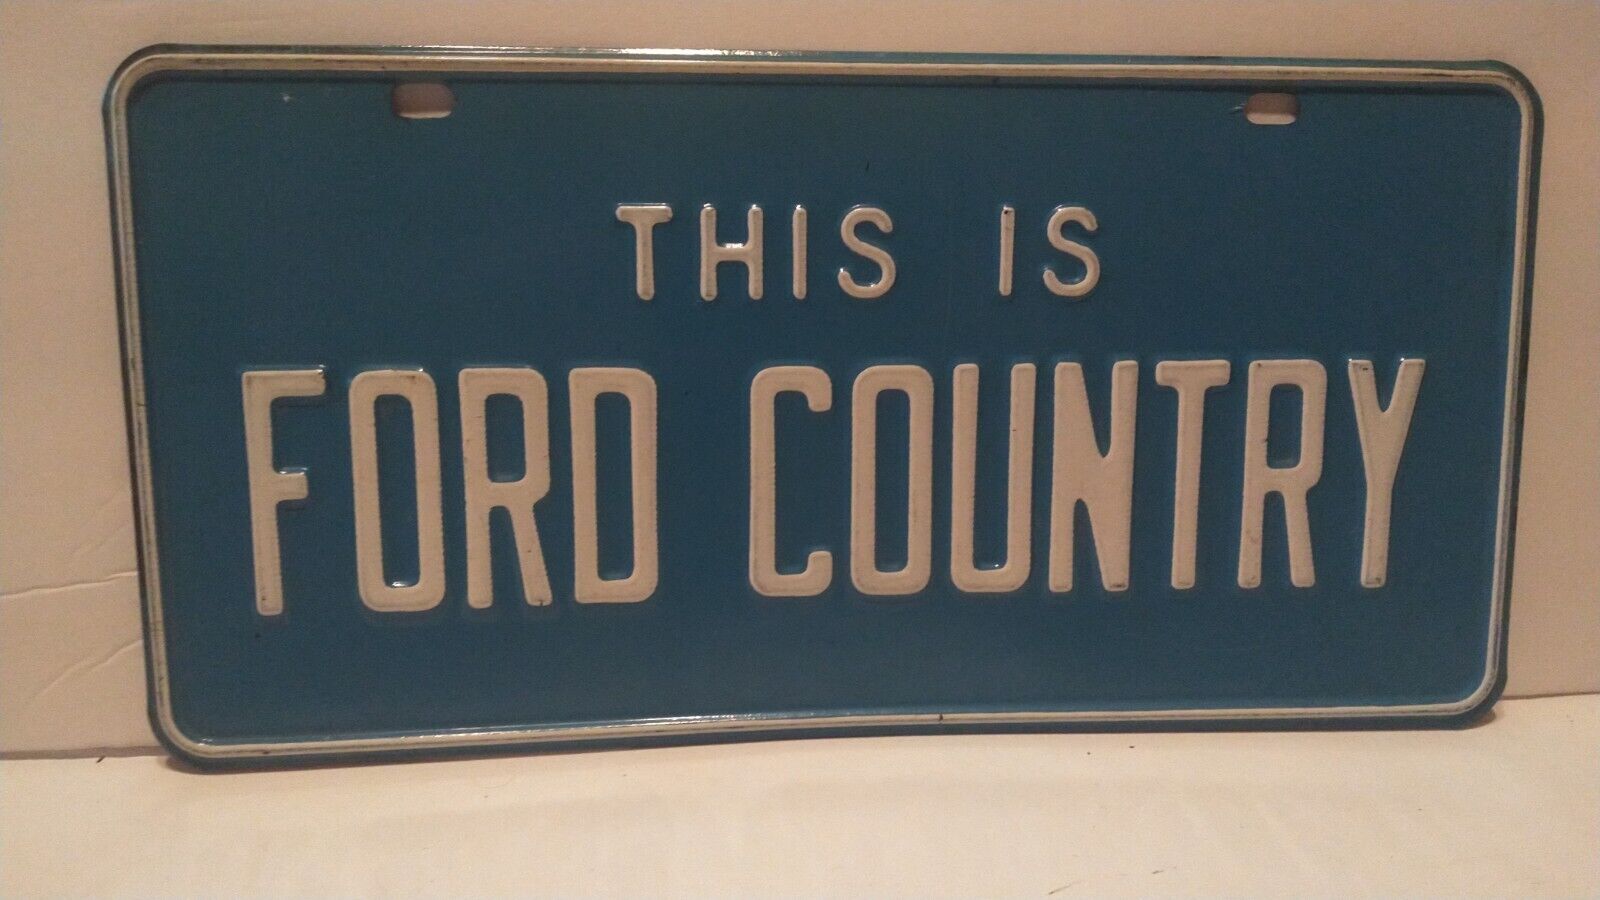 Original Vintage Ford  License Plate This Is Ford Country Rare 1950s - 1960s